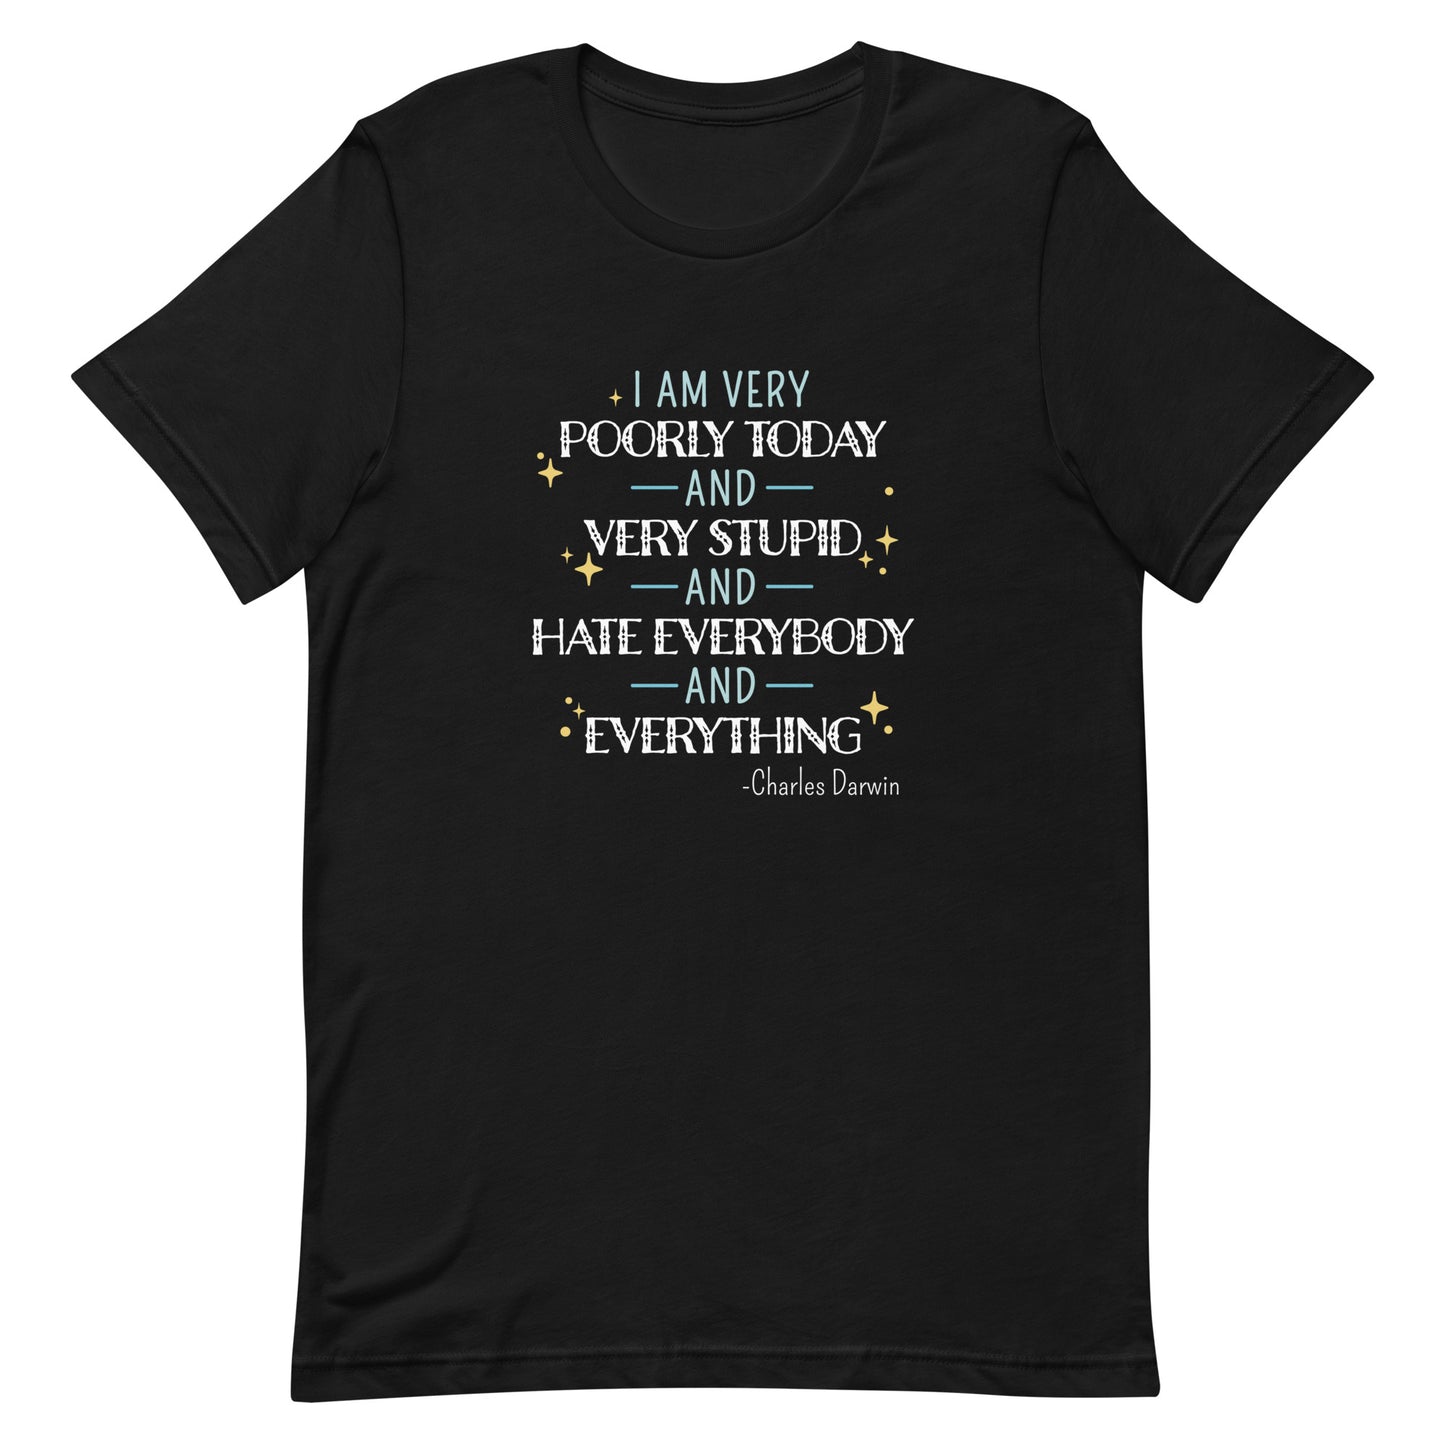 A black crewneck t-shirt featuring a quote from Charles Darwin in white and blue text. The quote reads "I am very poorly today and very stupid and hate everybody and everything".